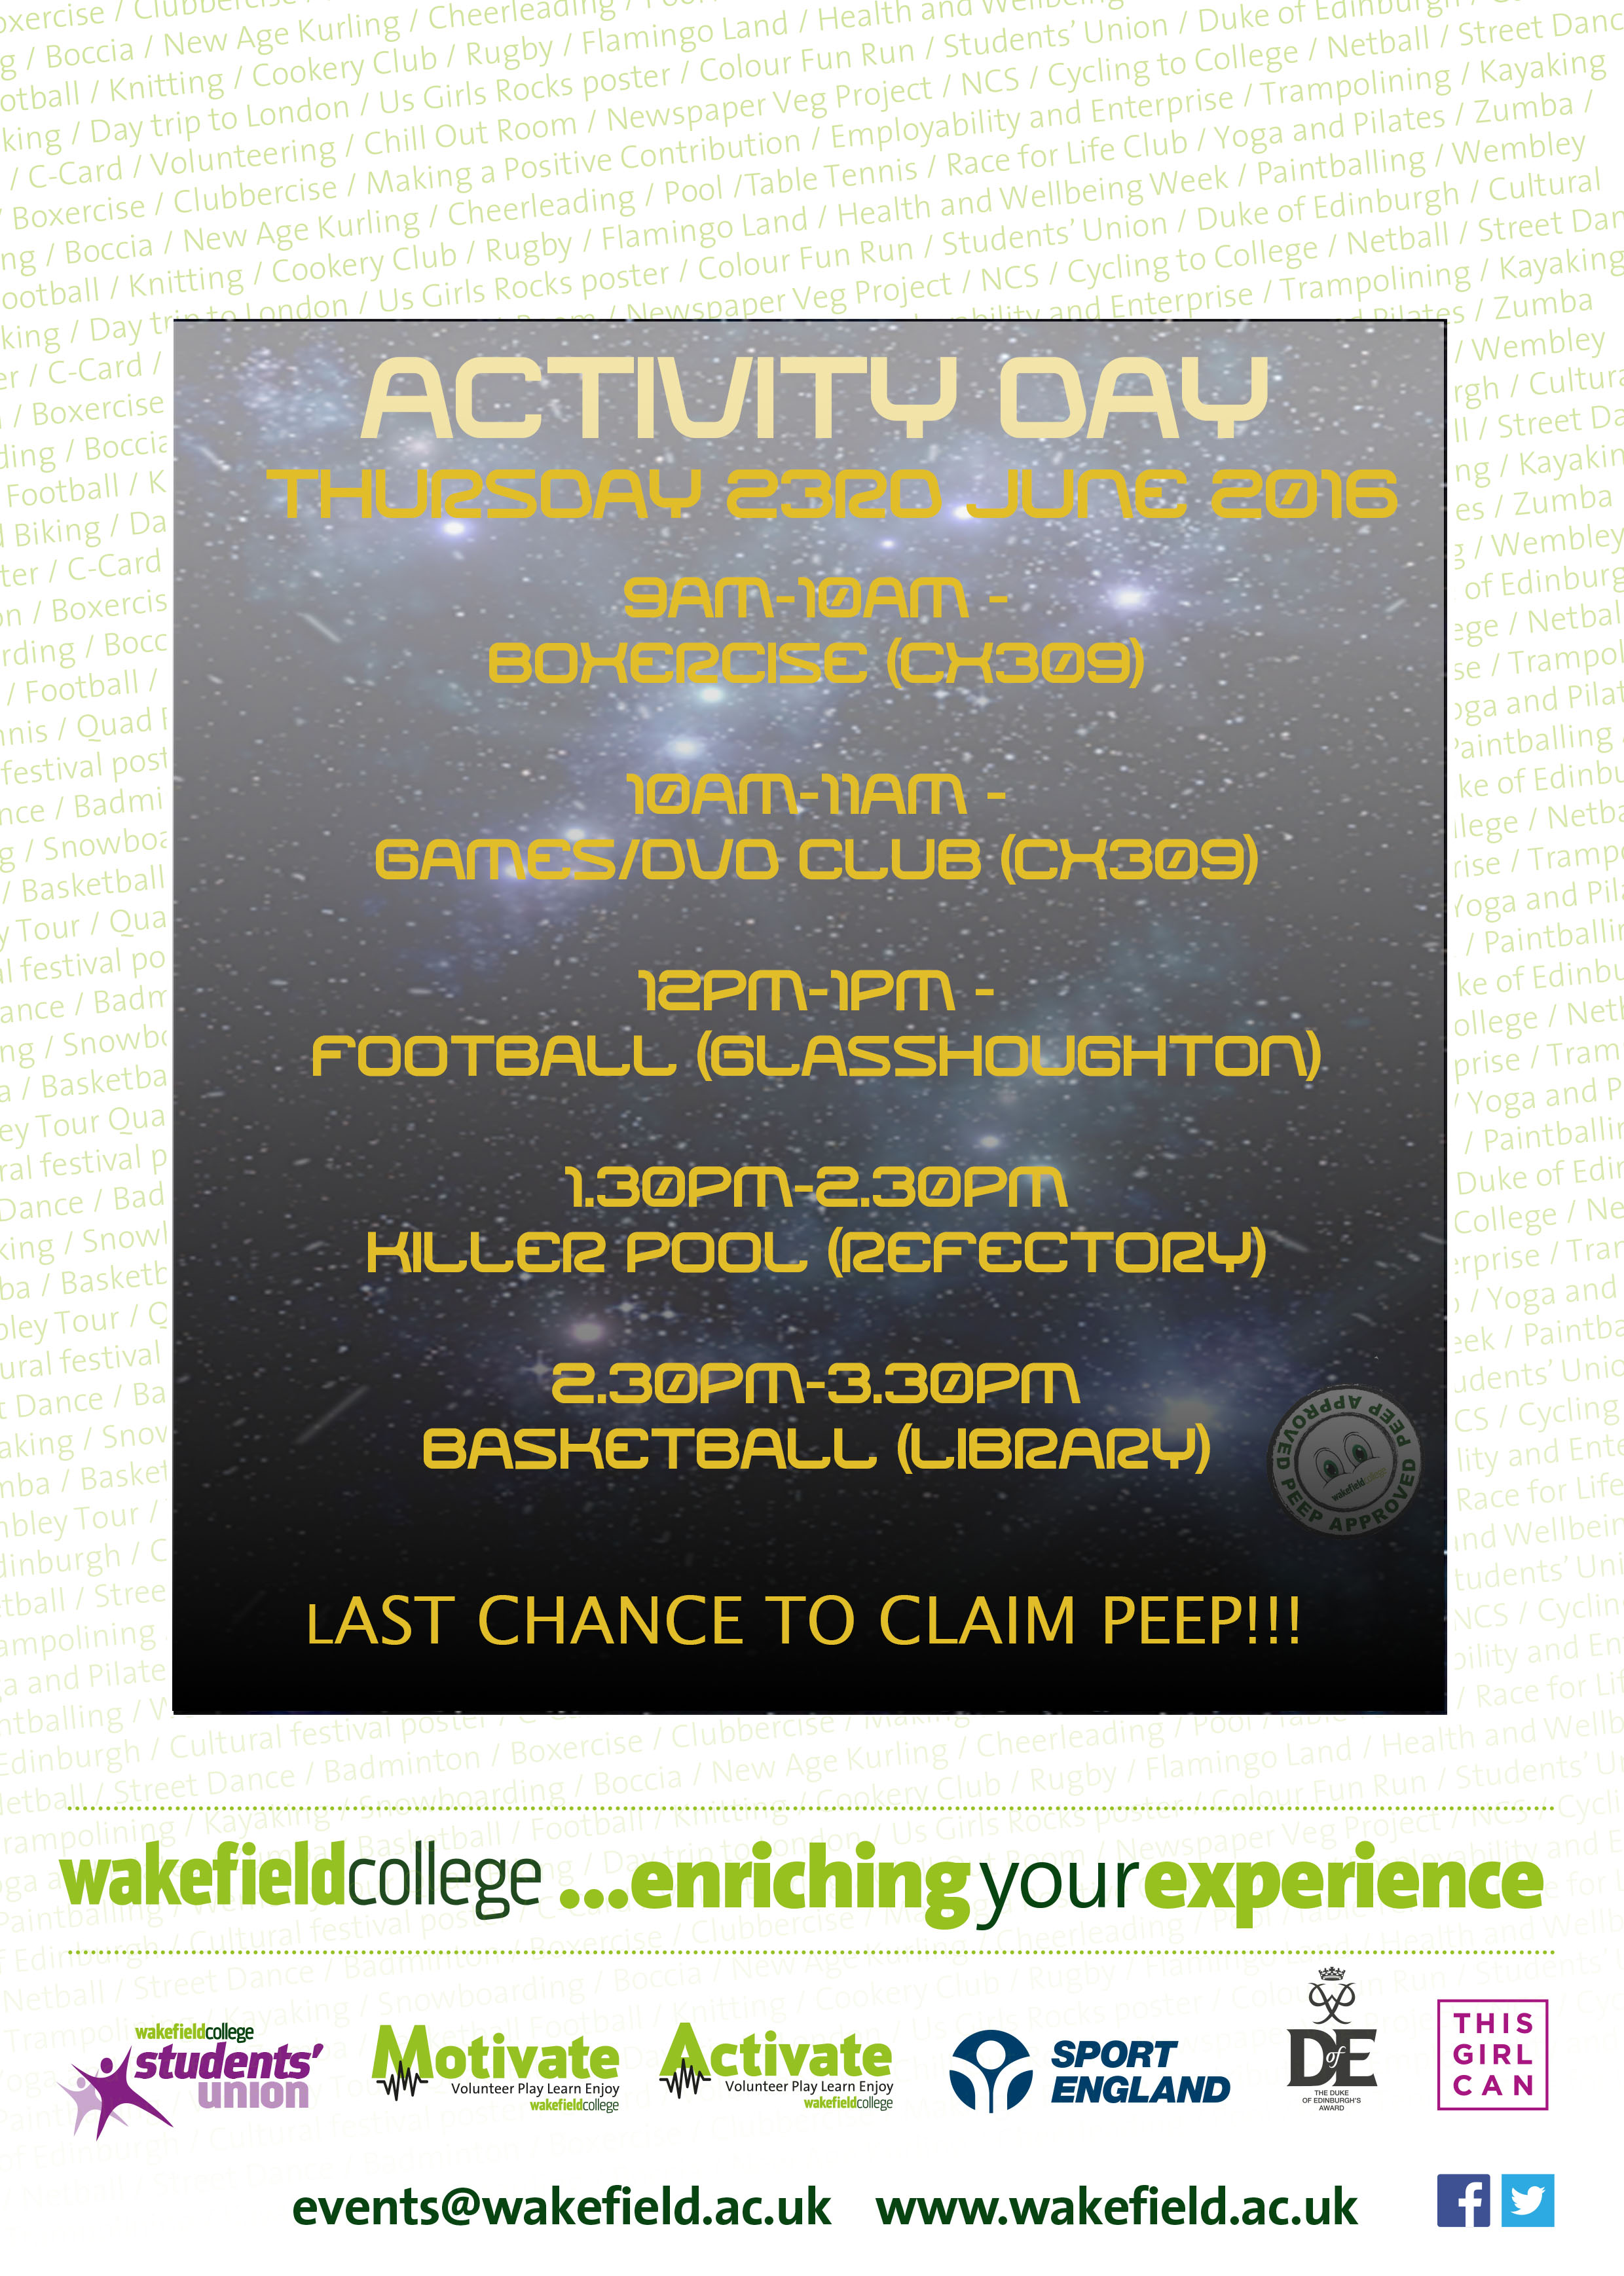 Attachment Activity Day Poster.jpg